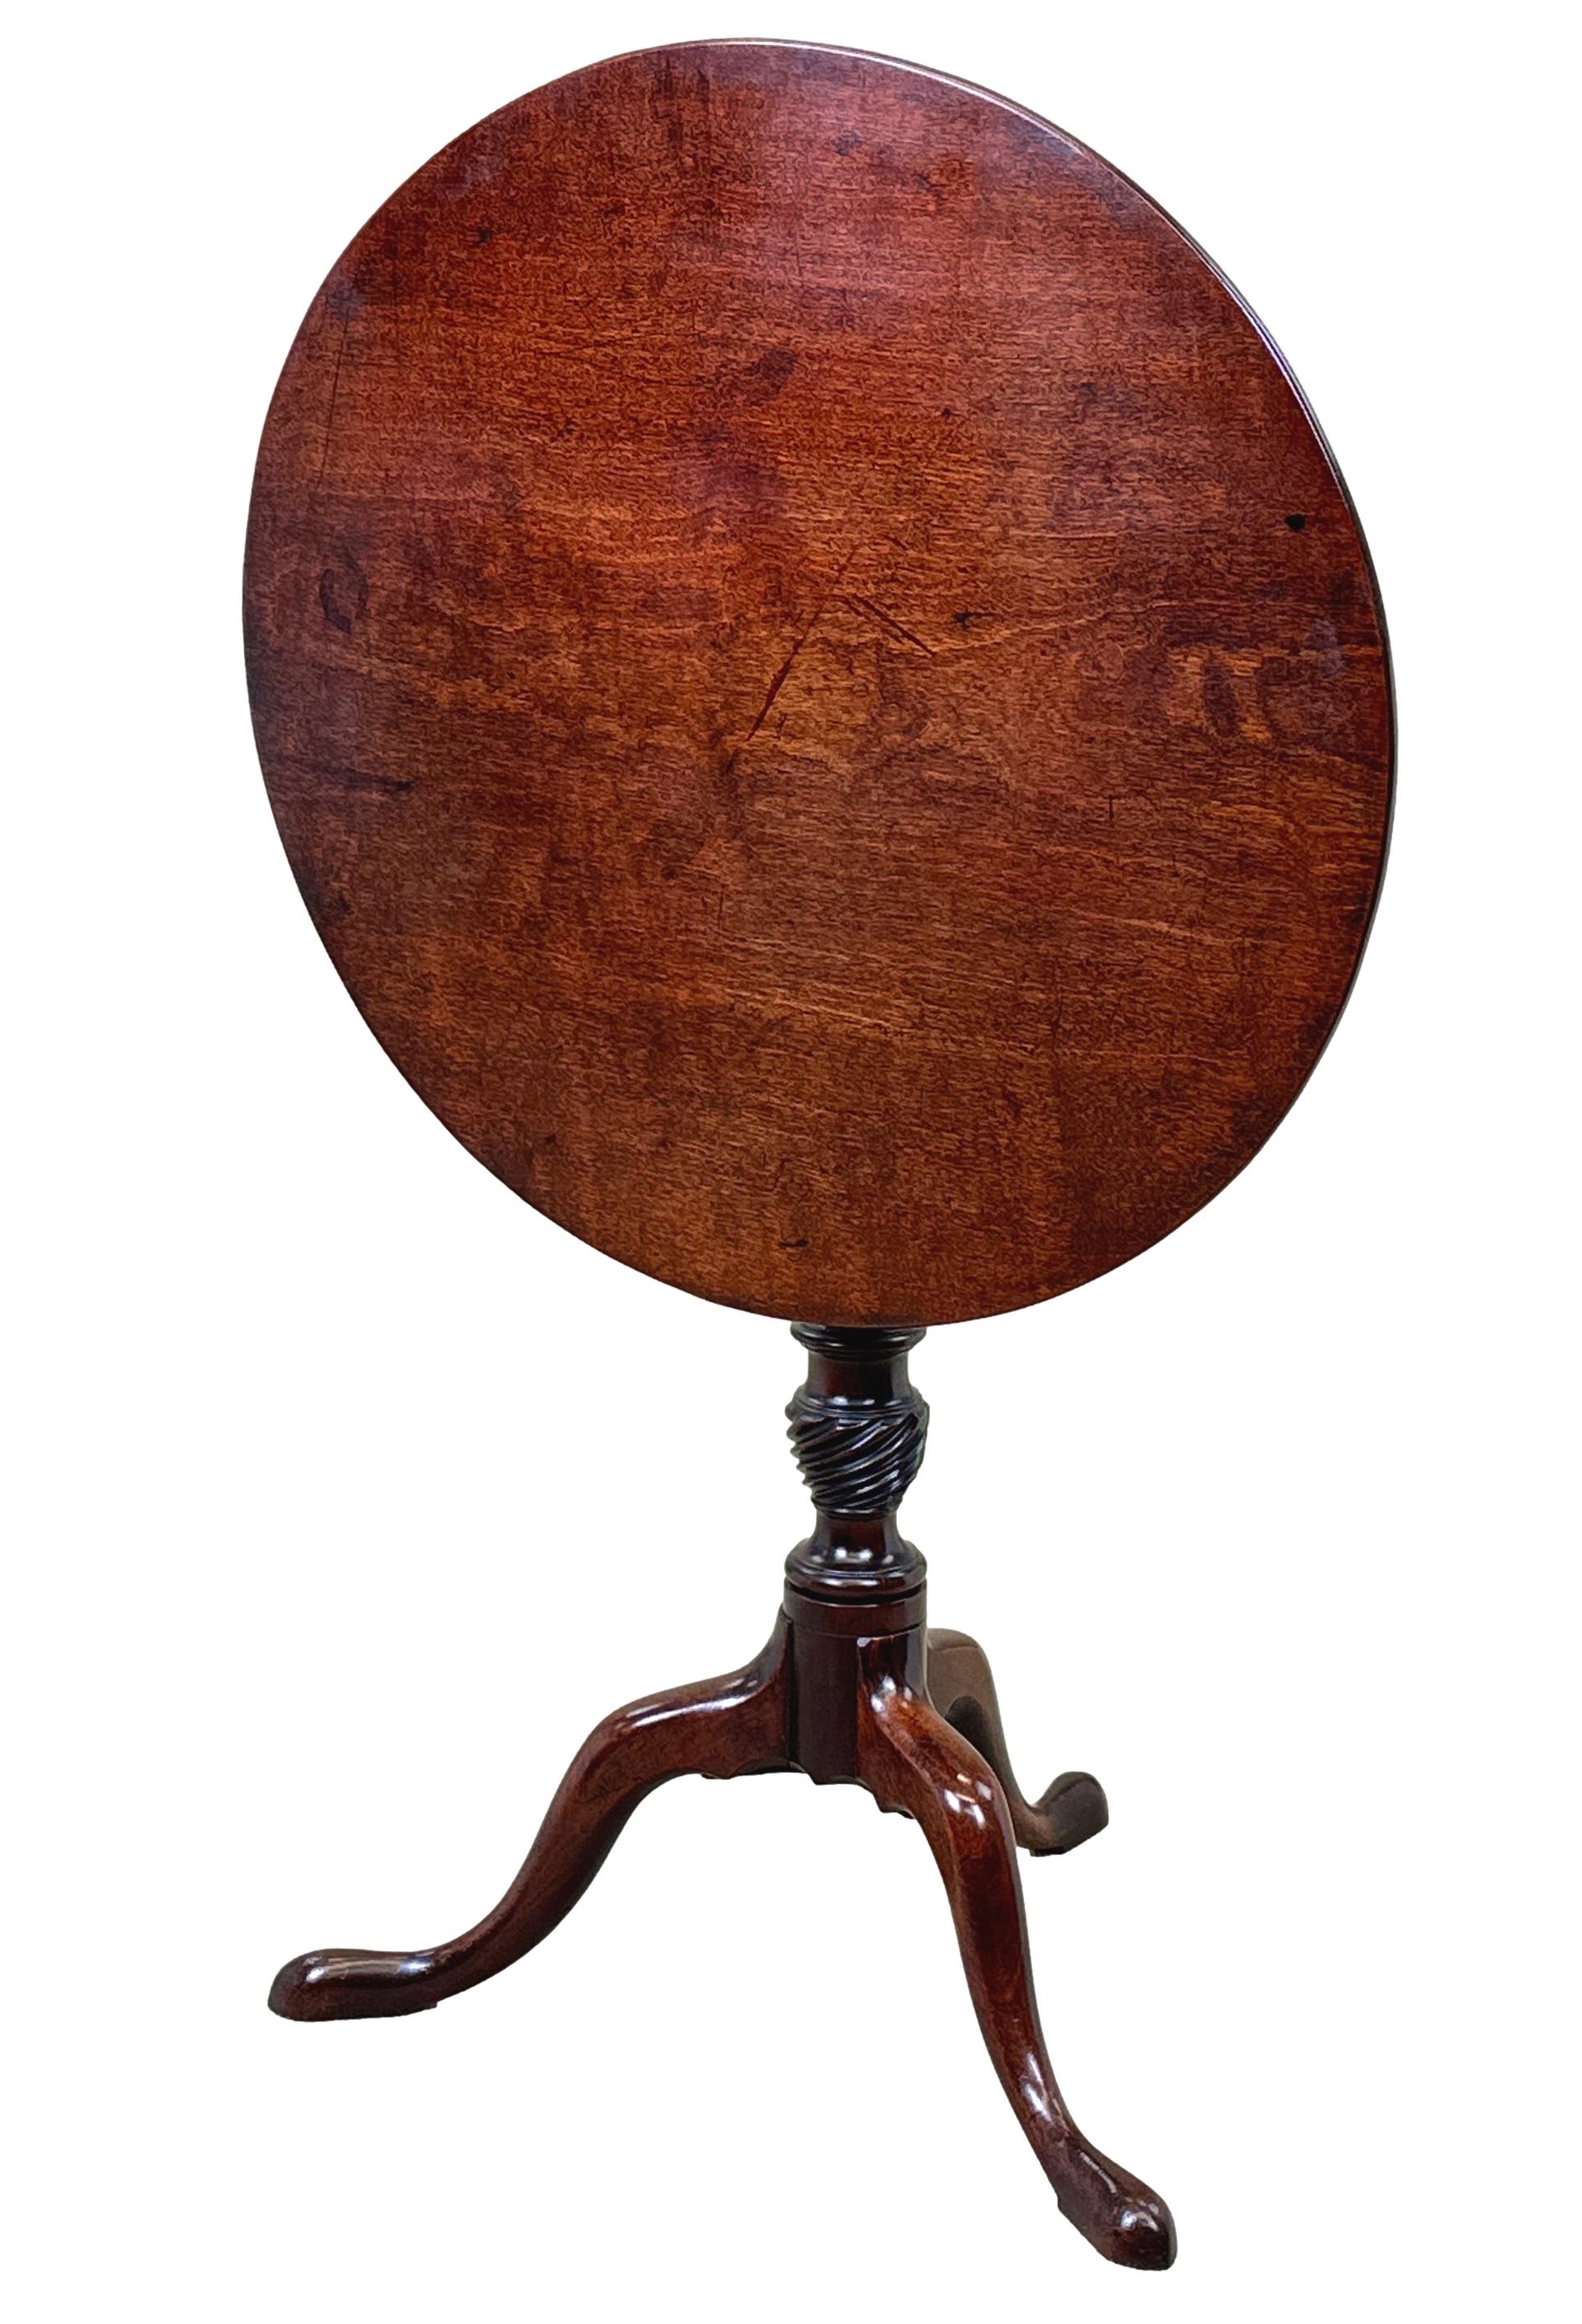 A Good Quality 18th century, Chippendale Period, Georgian Mahogany Wine Table, Or Lamp Table, Having Well Figured Circular Tilting Top, Retainining Exceptional Colour And Patina, Raised On Turned Central Stem With Wrythen Carved Decoration And